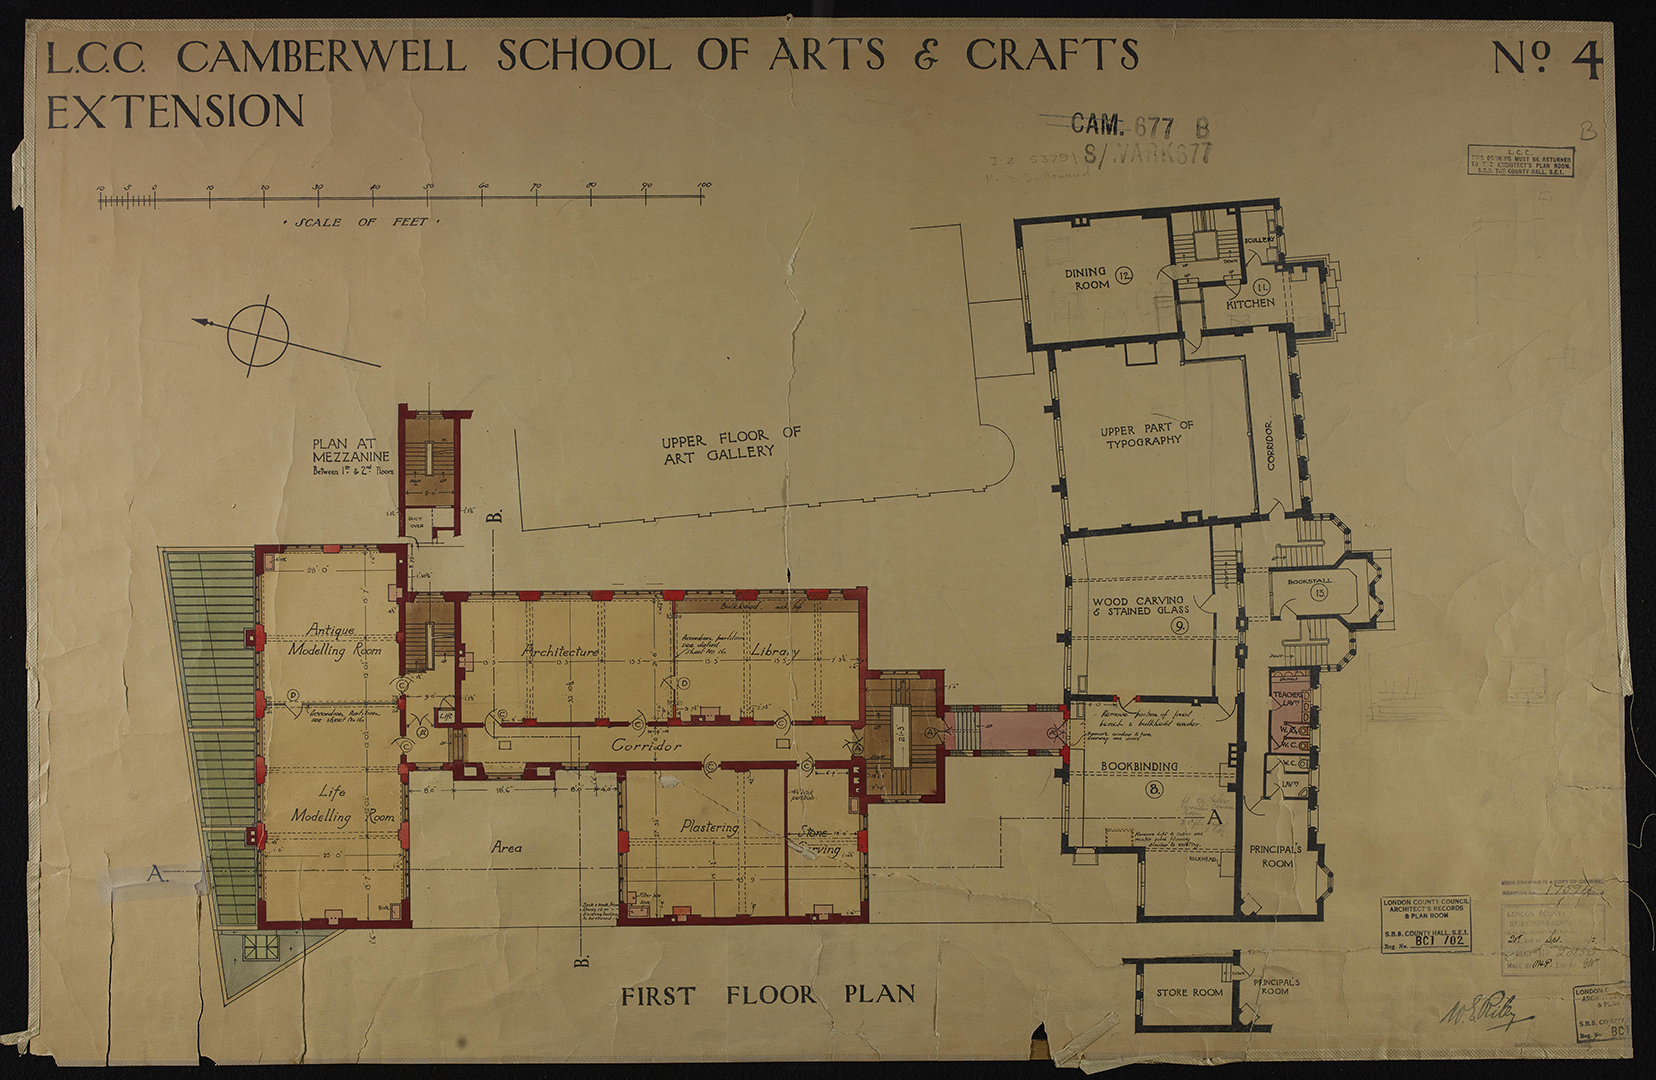 Hand drawn architectural plan showing the first floor outline of the Camberwell School of Arts and Crafts extension